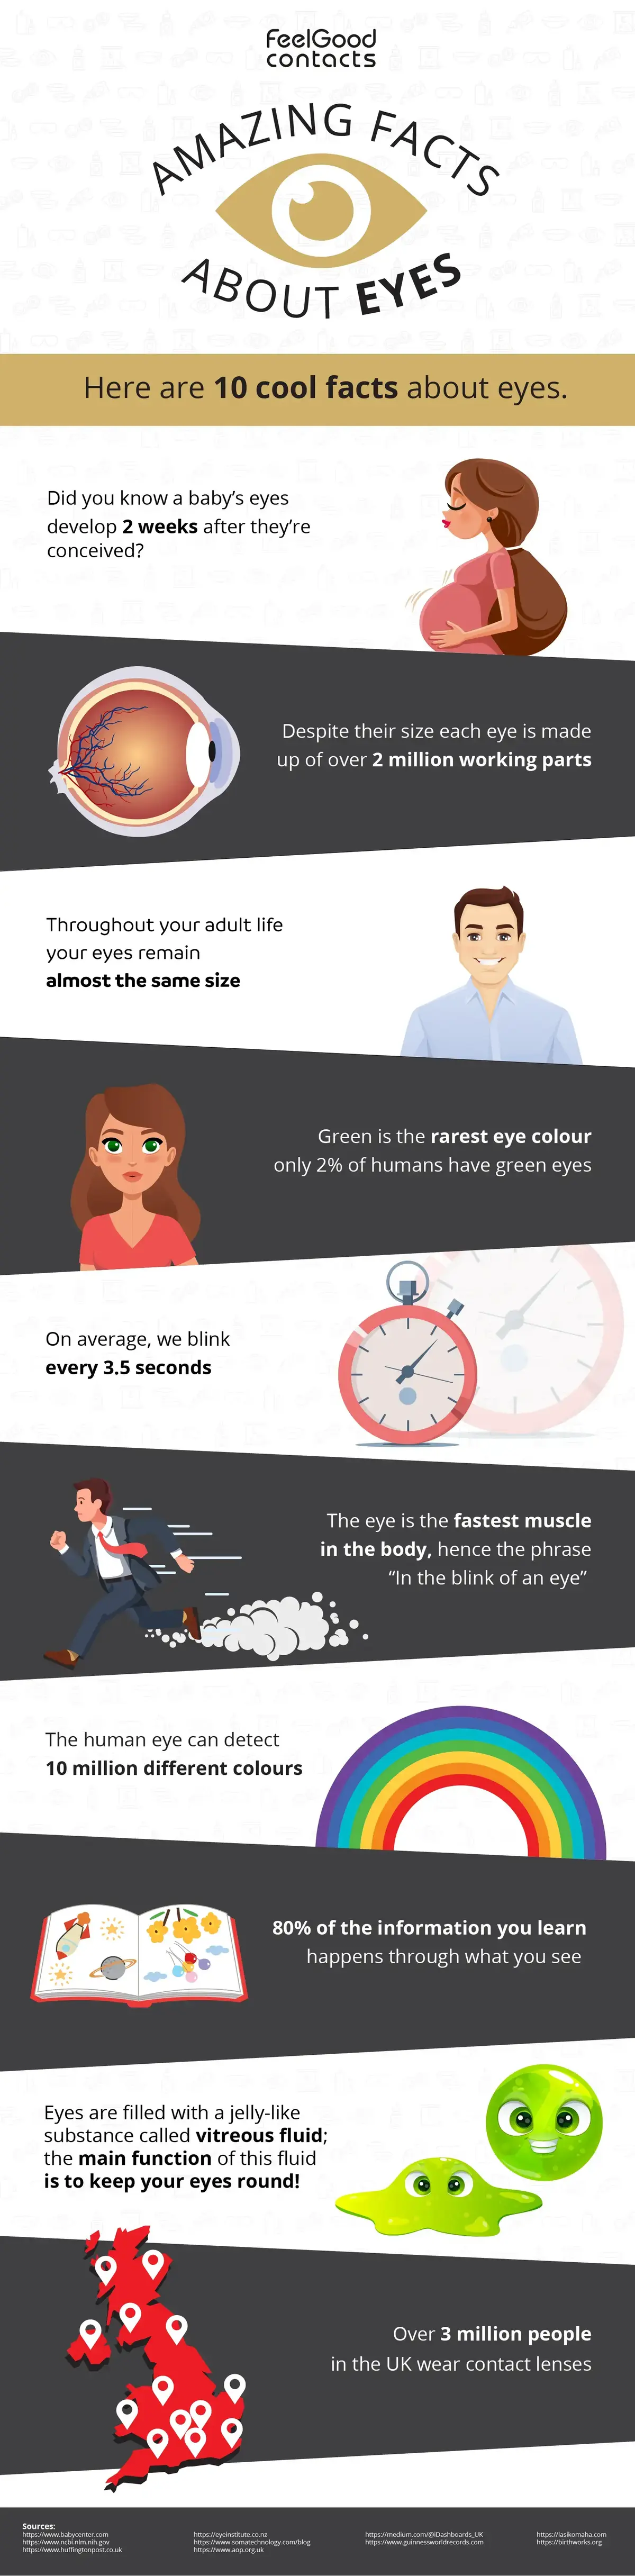 eye facts infographic